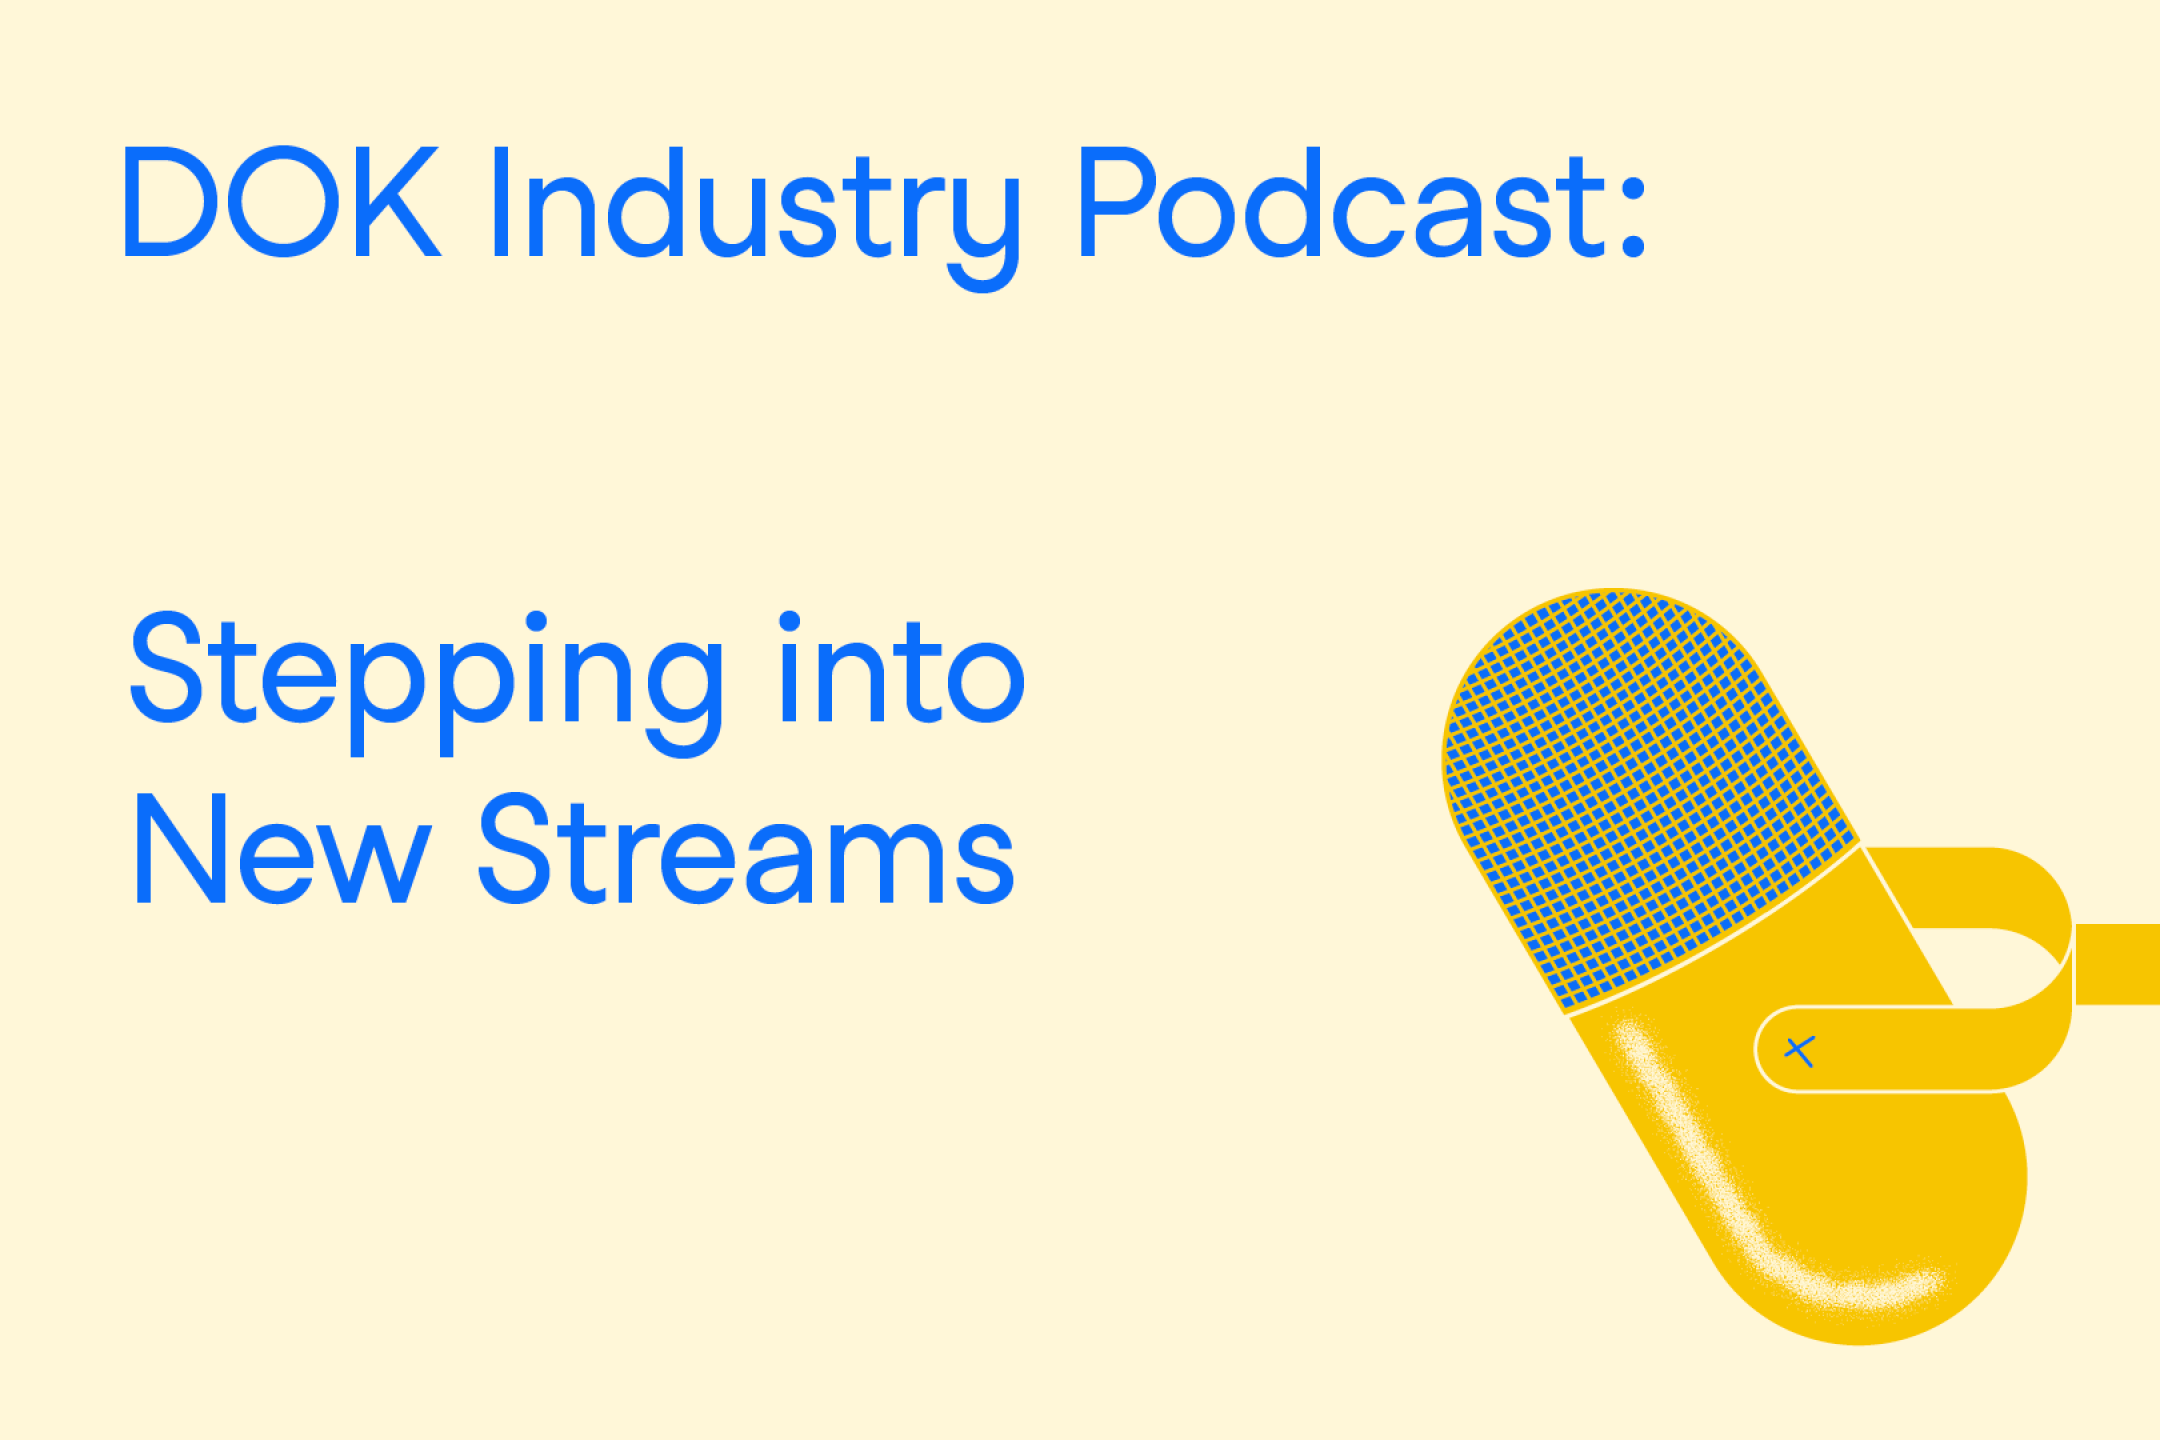 A text graphic with blue letters on a yellow background. At the right the illustration of a microphone. At the left the text: “DOK Industry Podcast: Stepping into New Streams”